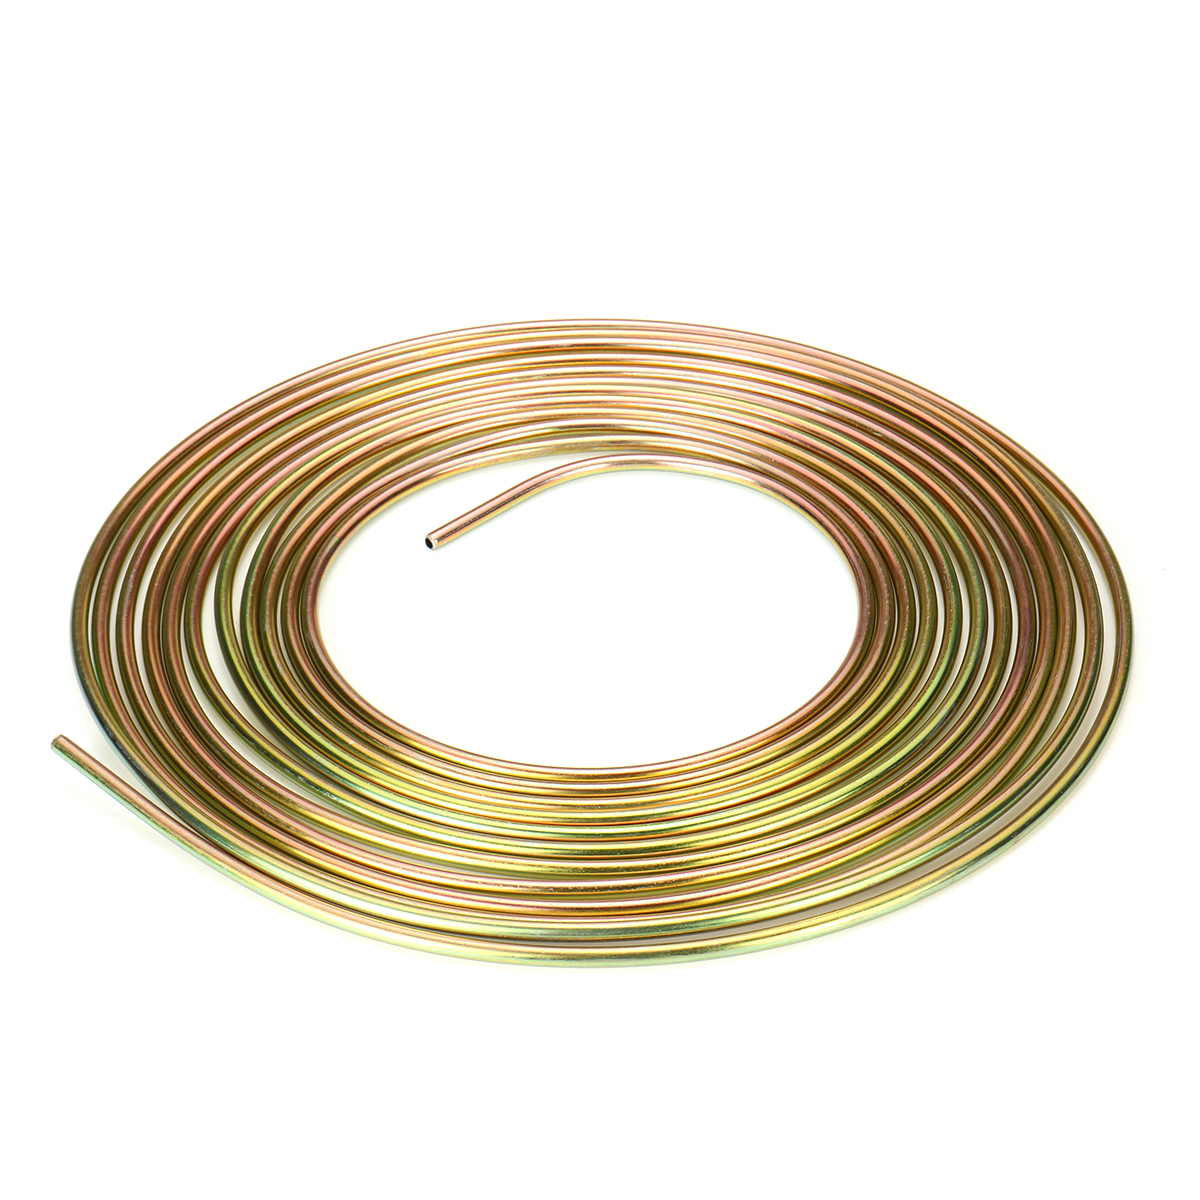 25ft-Roll-of-316-Plated-Brake-Line-Tubing-OD-Copper-Nickel-With-16x-Tube-Nuts-1686126-9